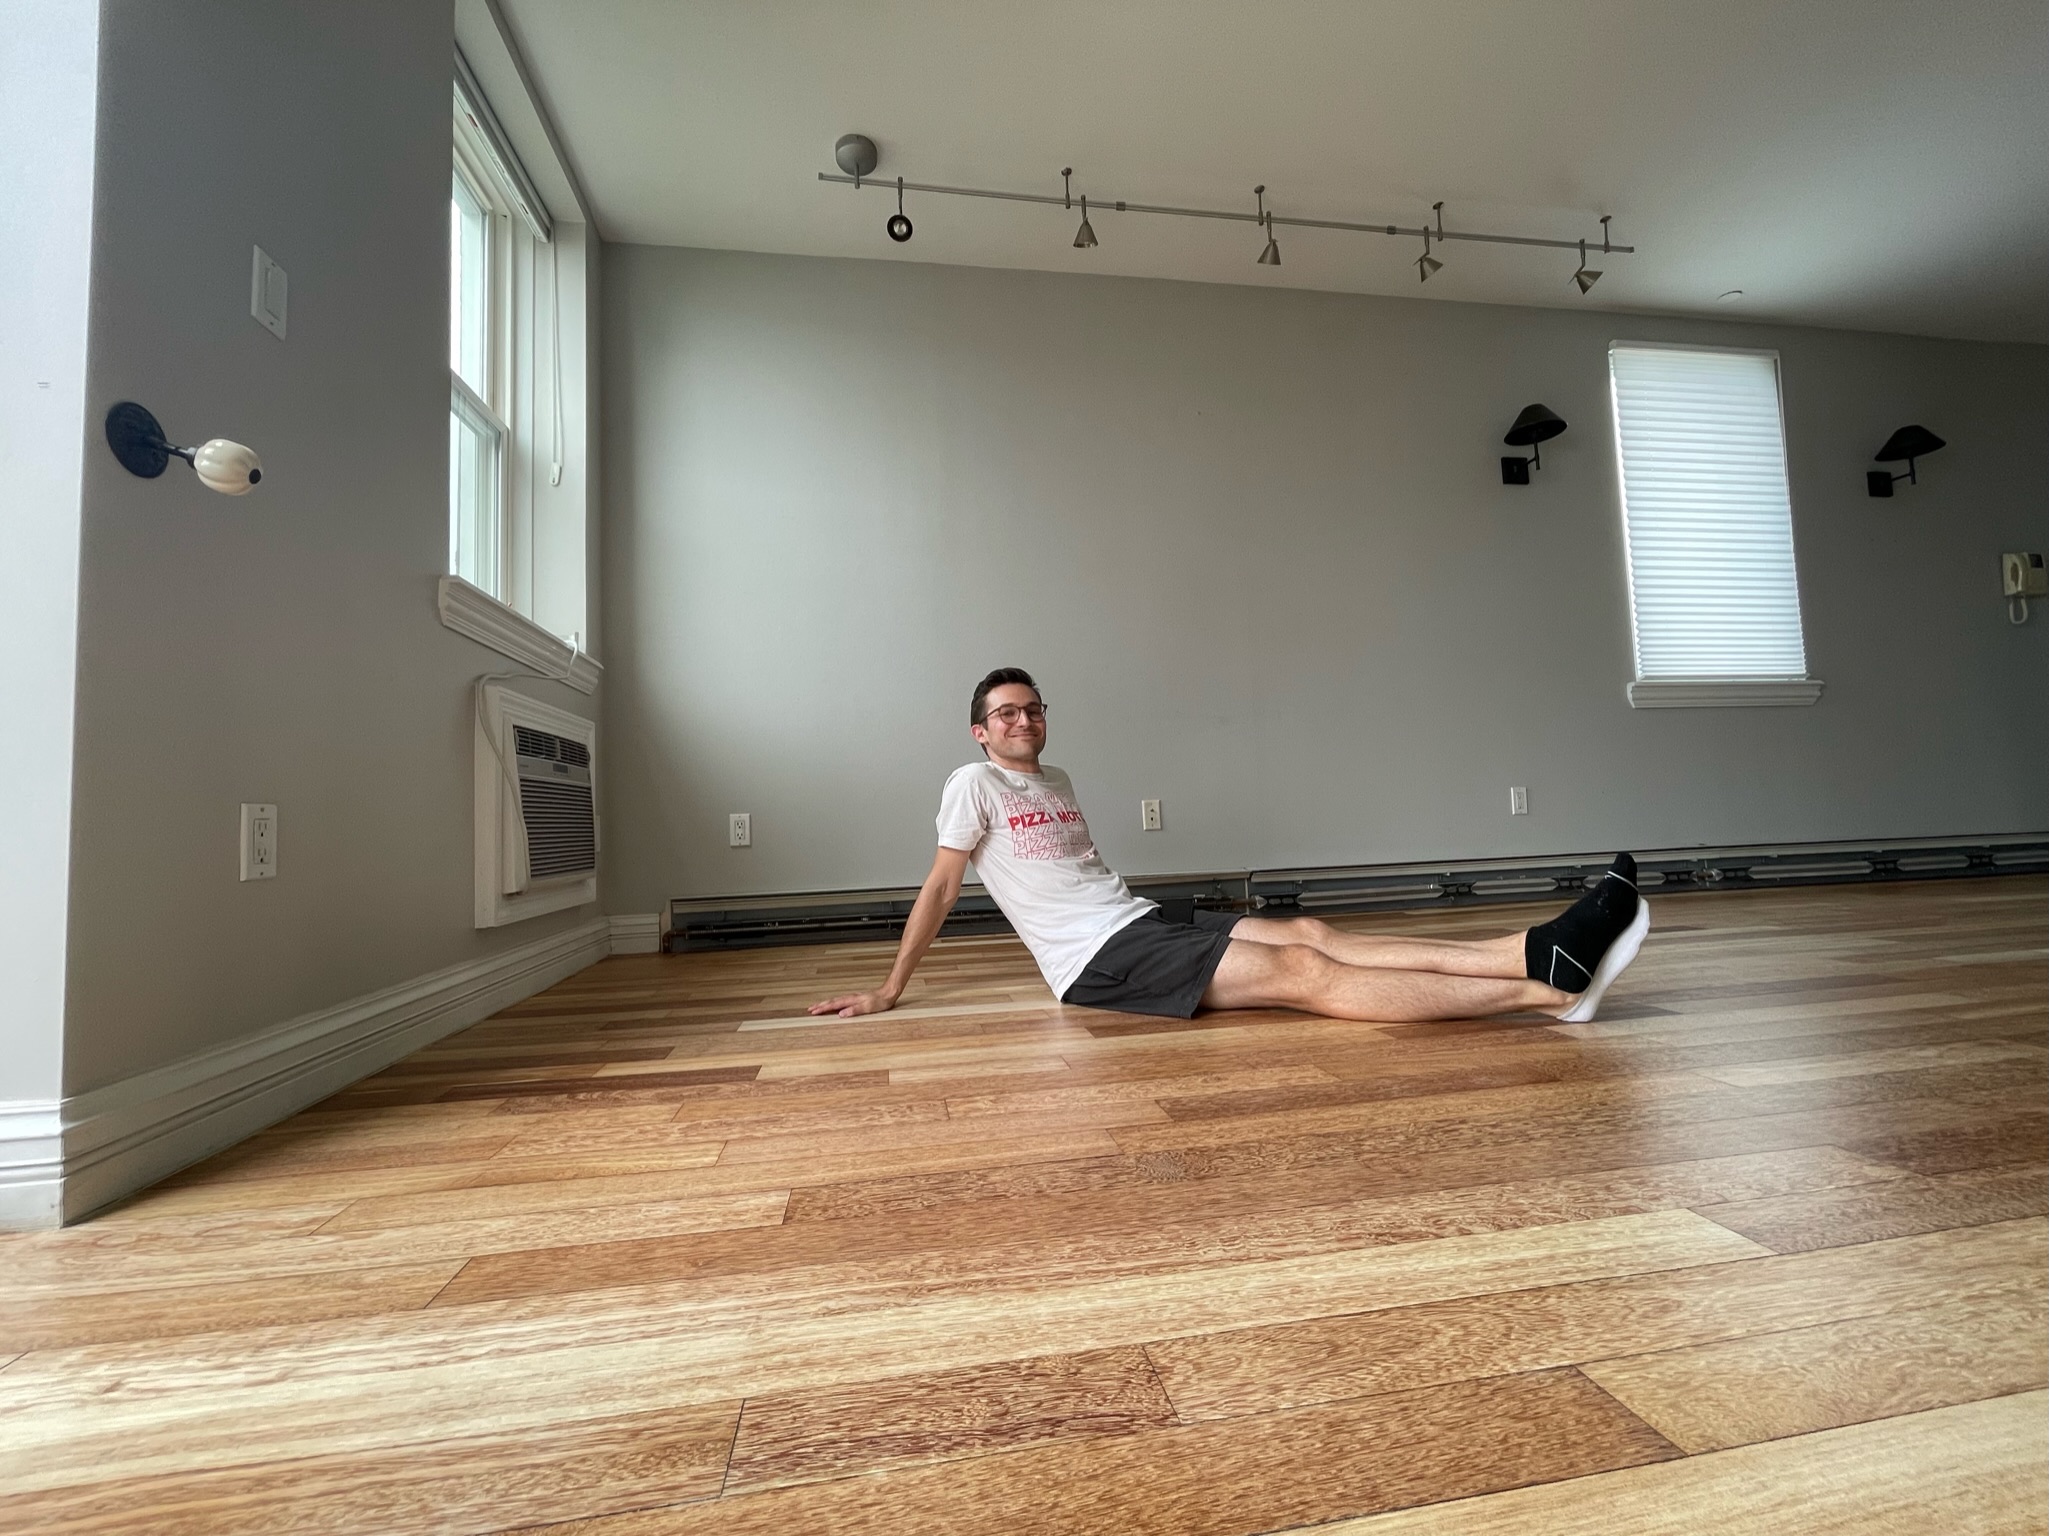 Me sitting on the refinished floor of our new home